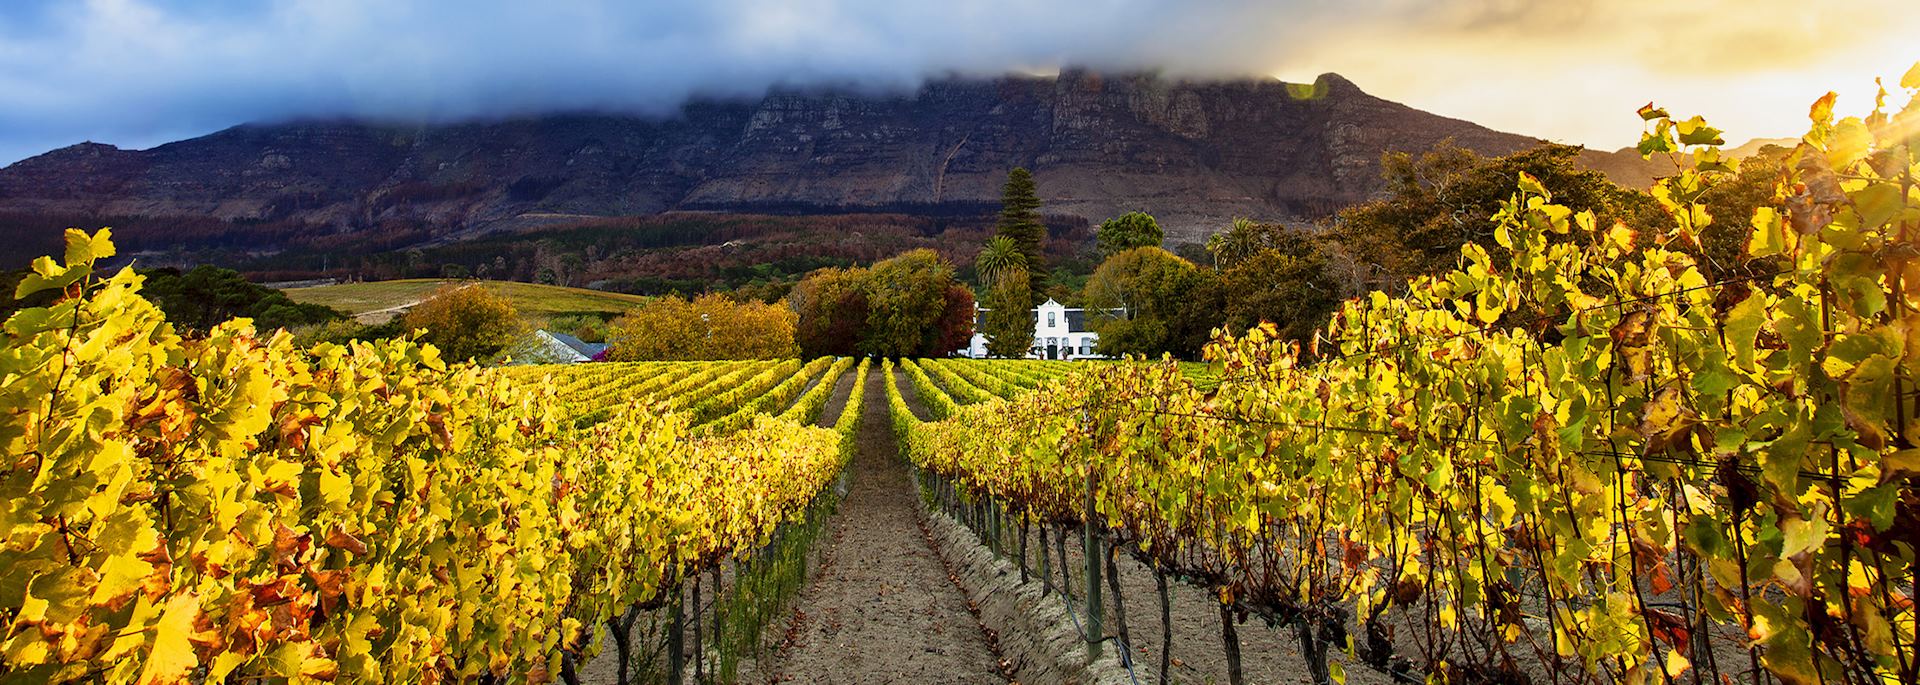 Autumn vineyards, Cape Town, South Africa